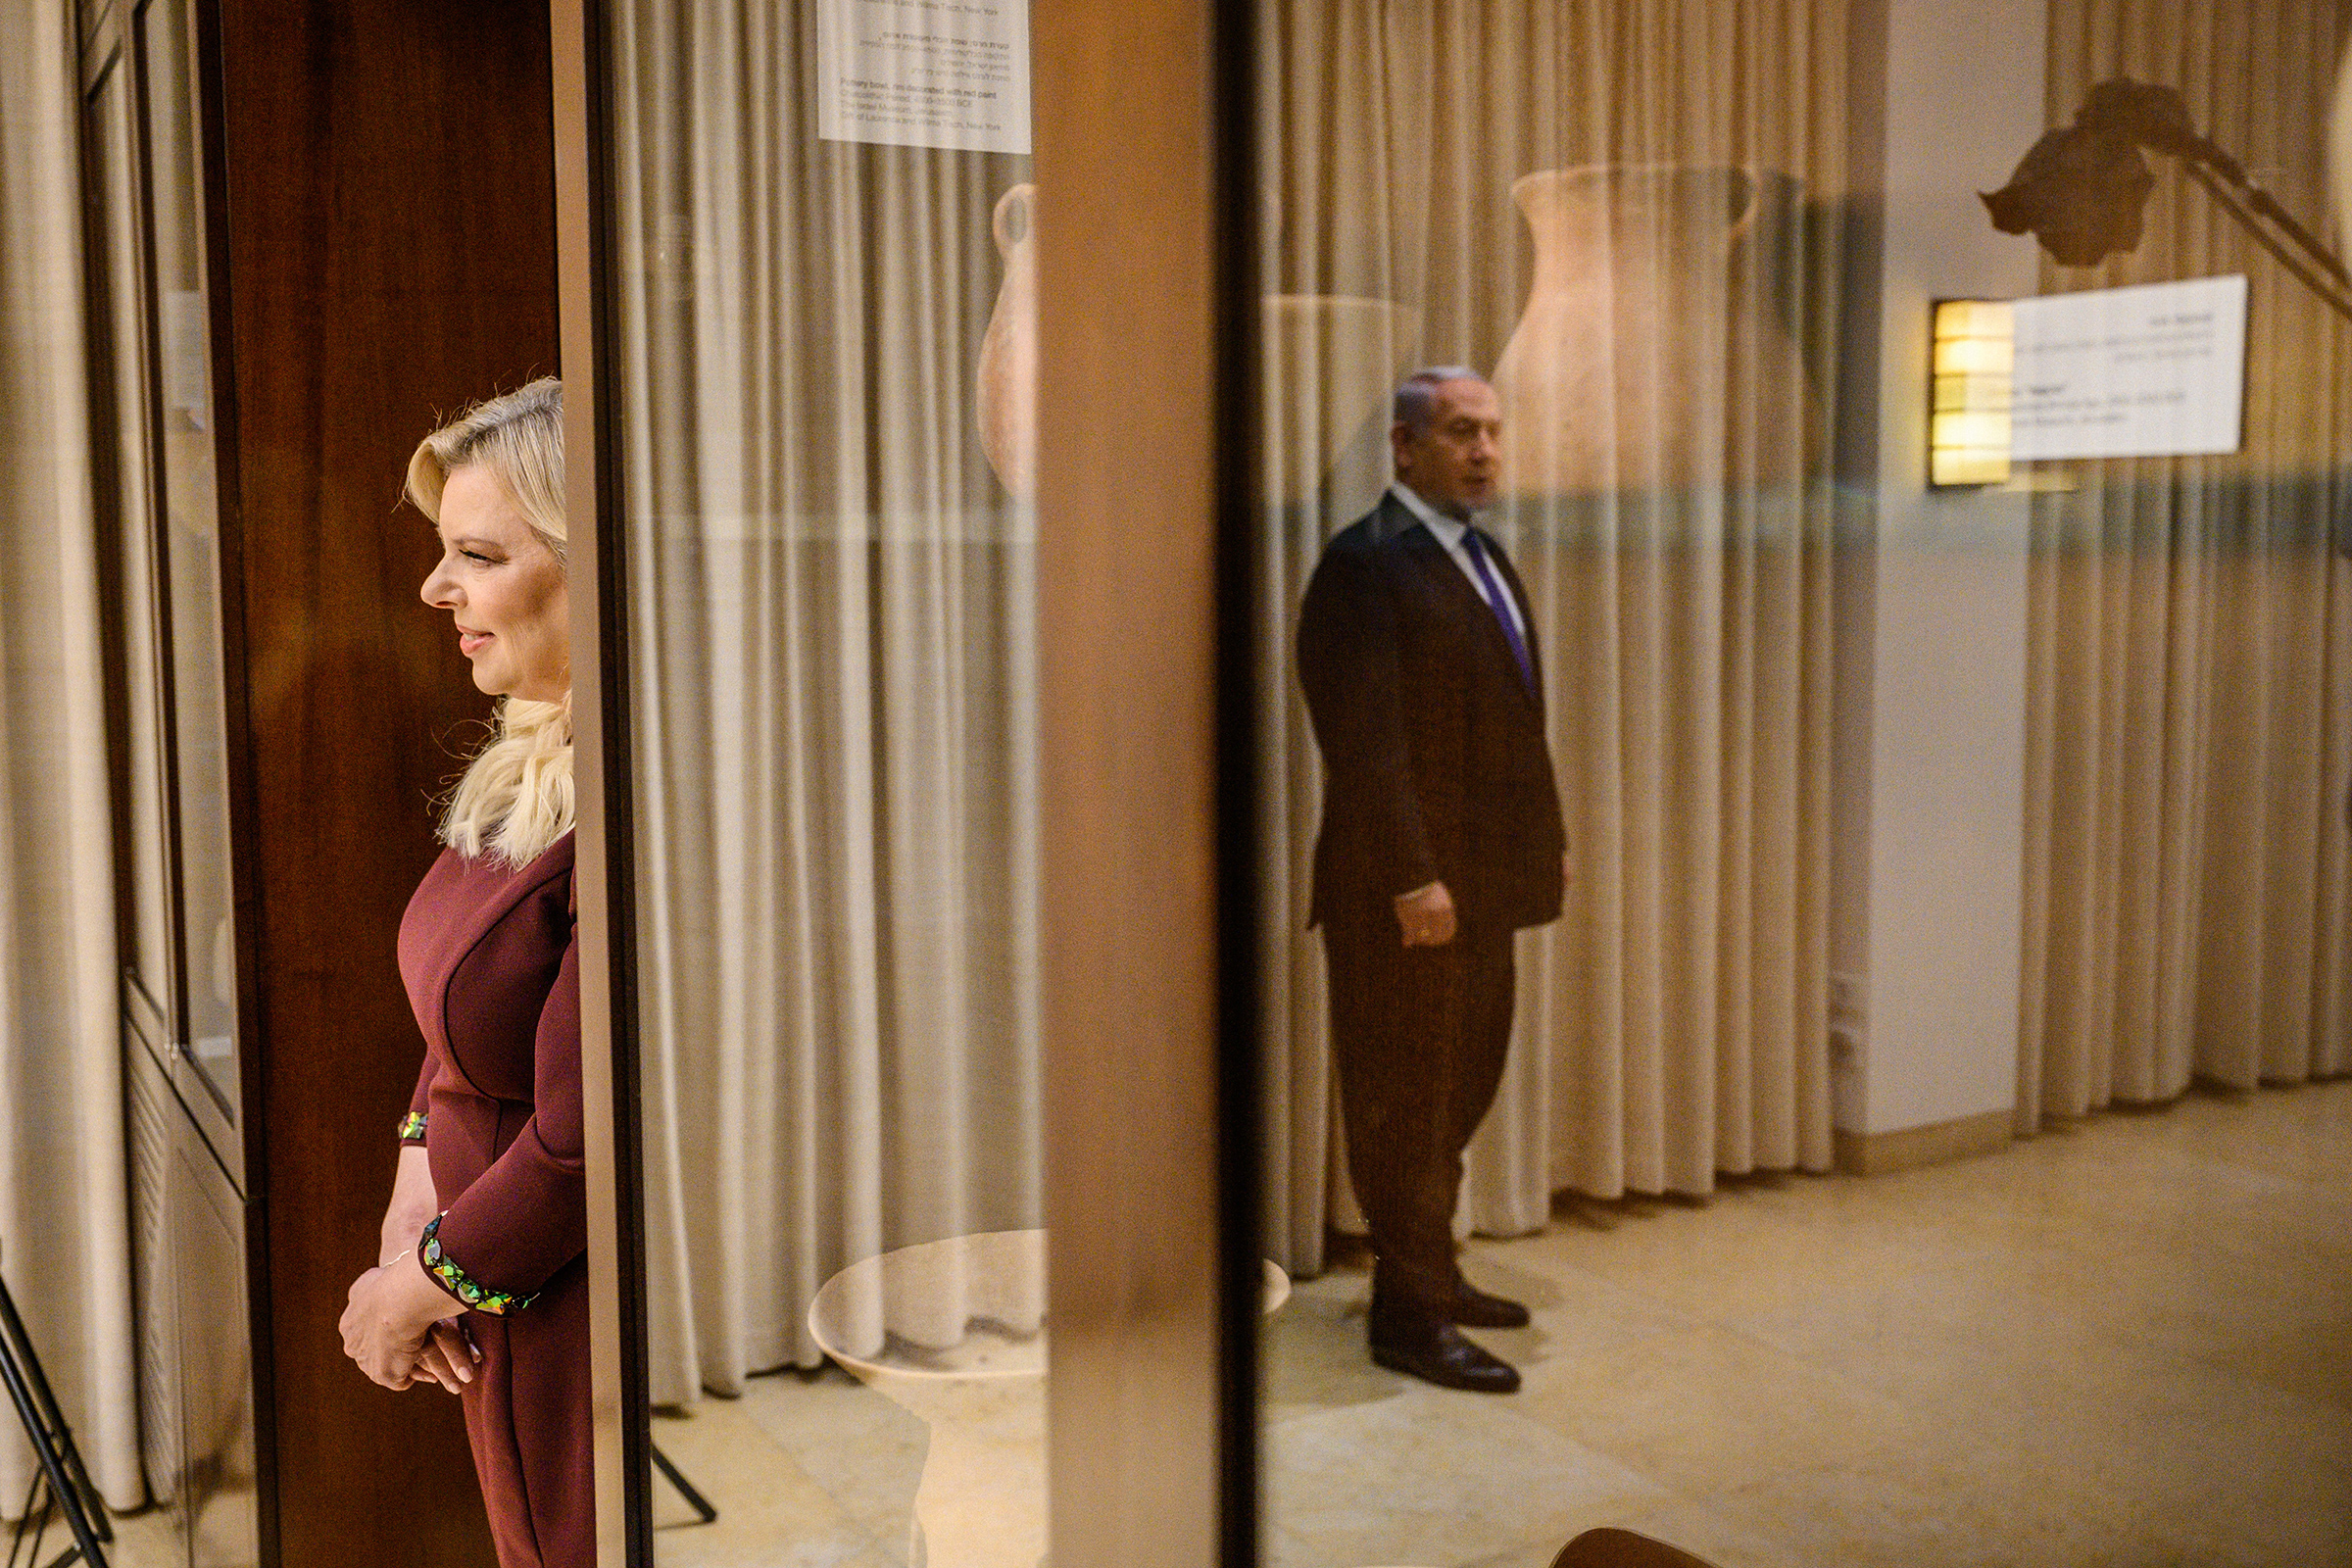 Sara Netanyahu looks on as the Prime Minister stands for a portrait in their residence in Jerusalem. (Yuri Kozyrev—NOOR for TIME)